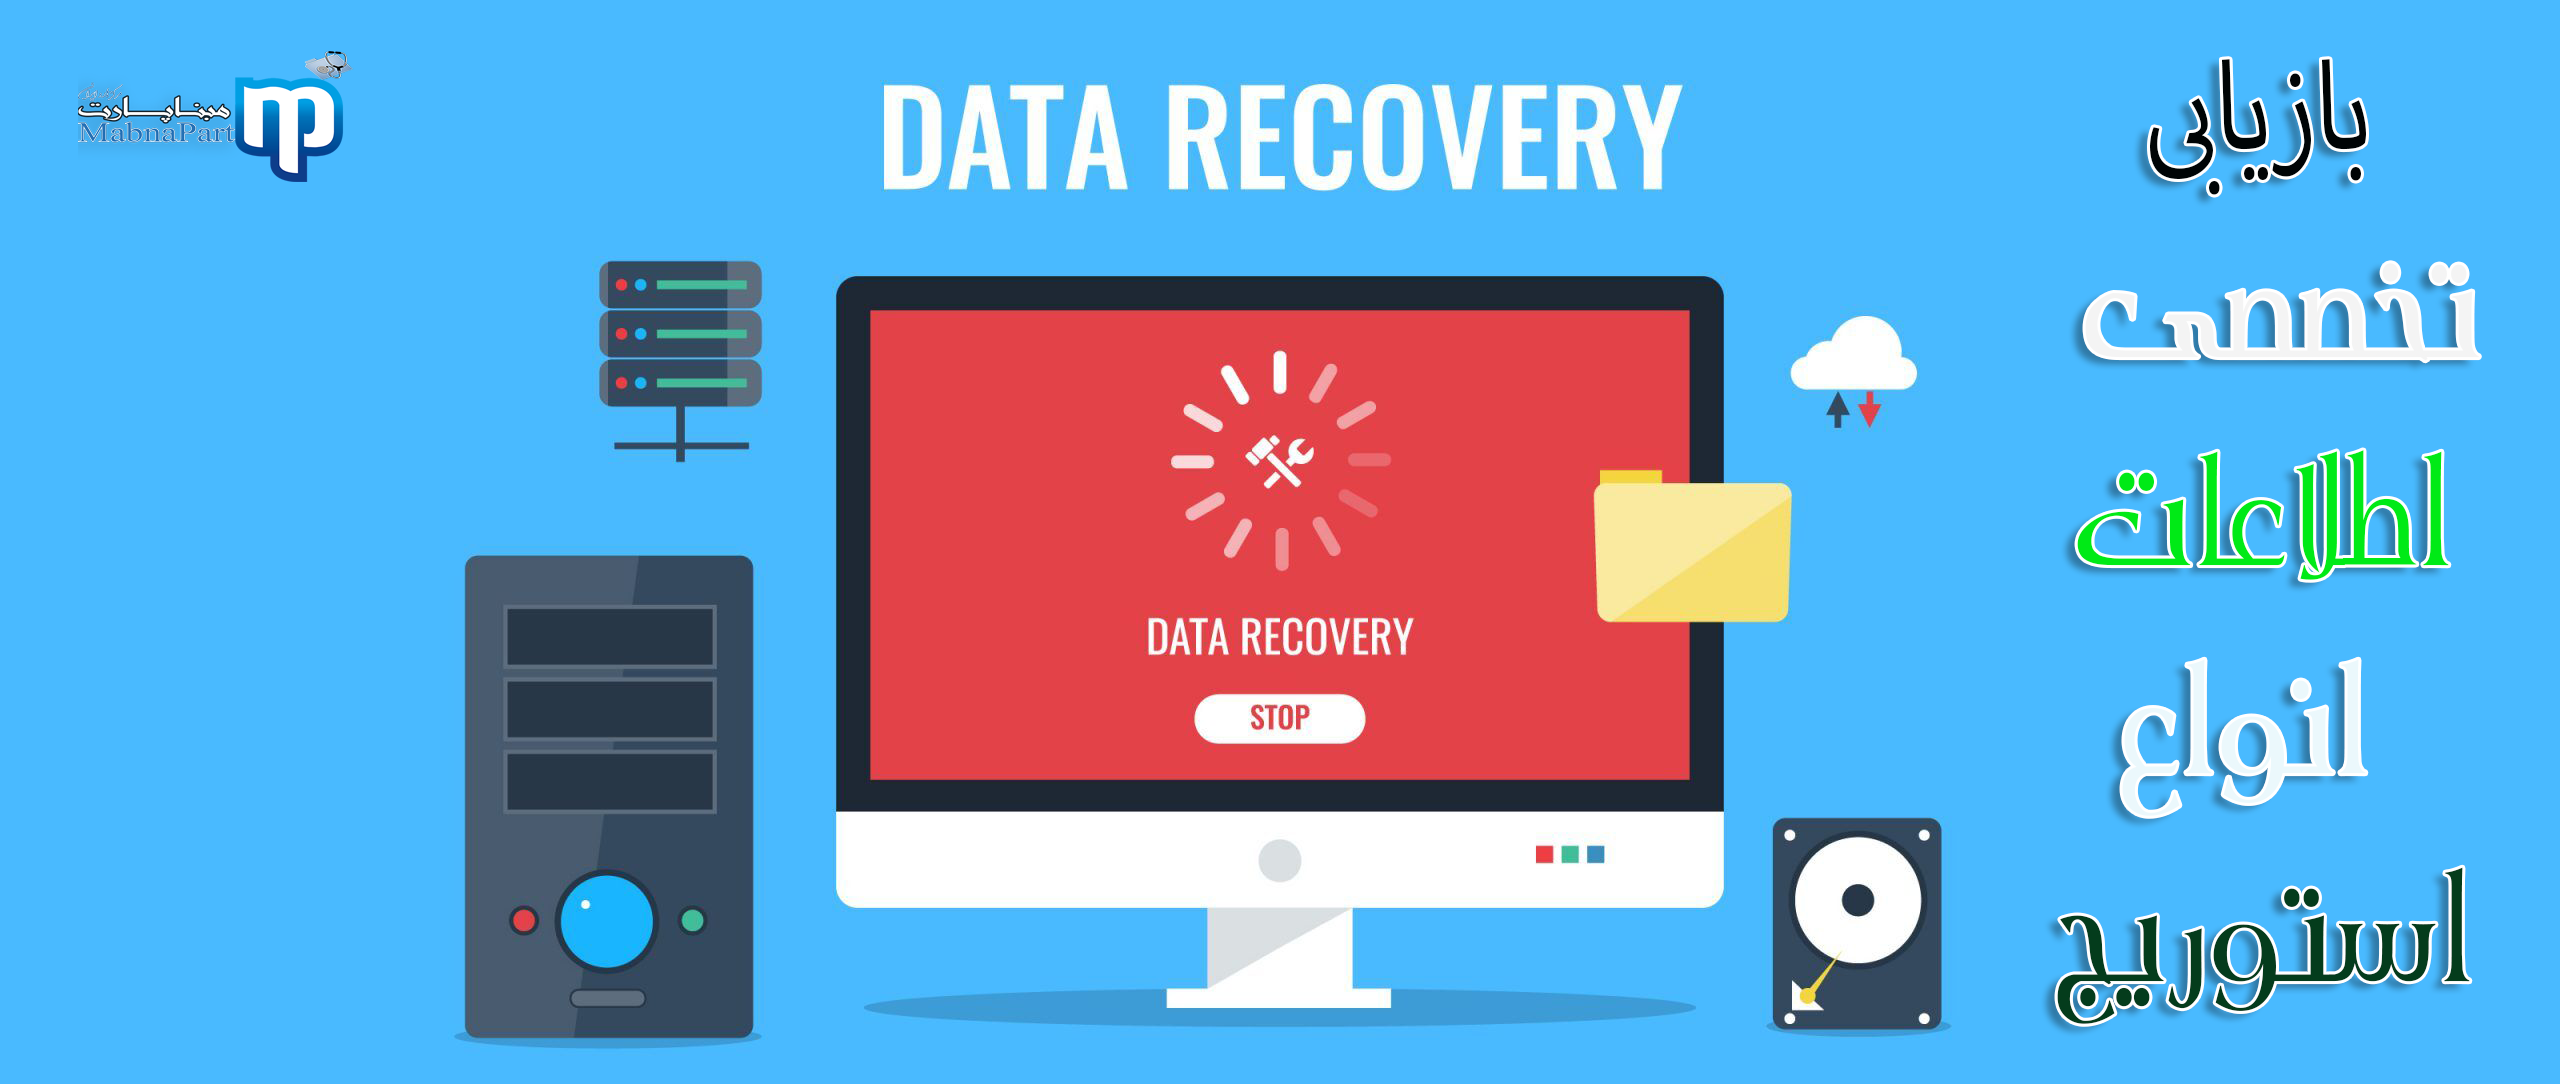 data-recovery-image-scaled-1